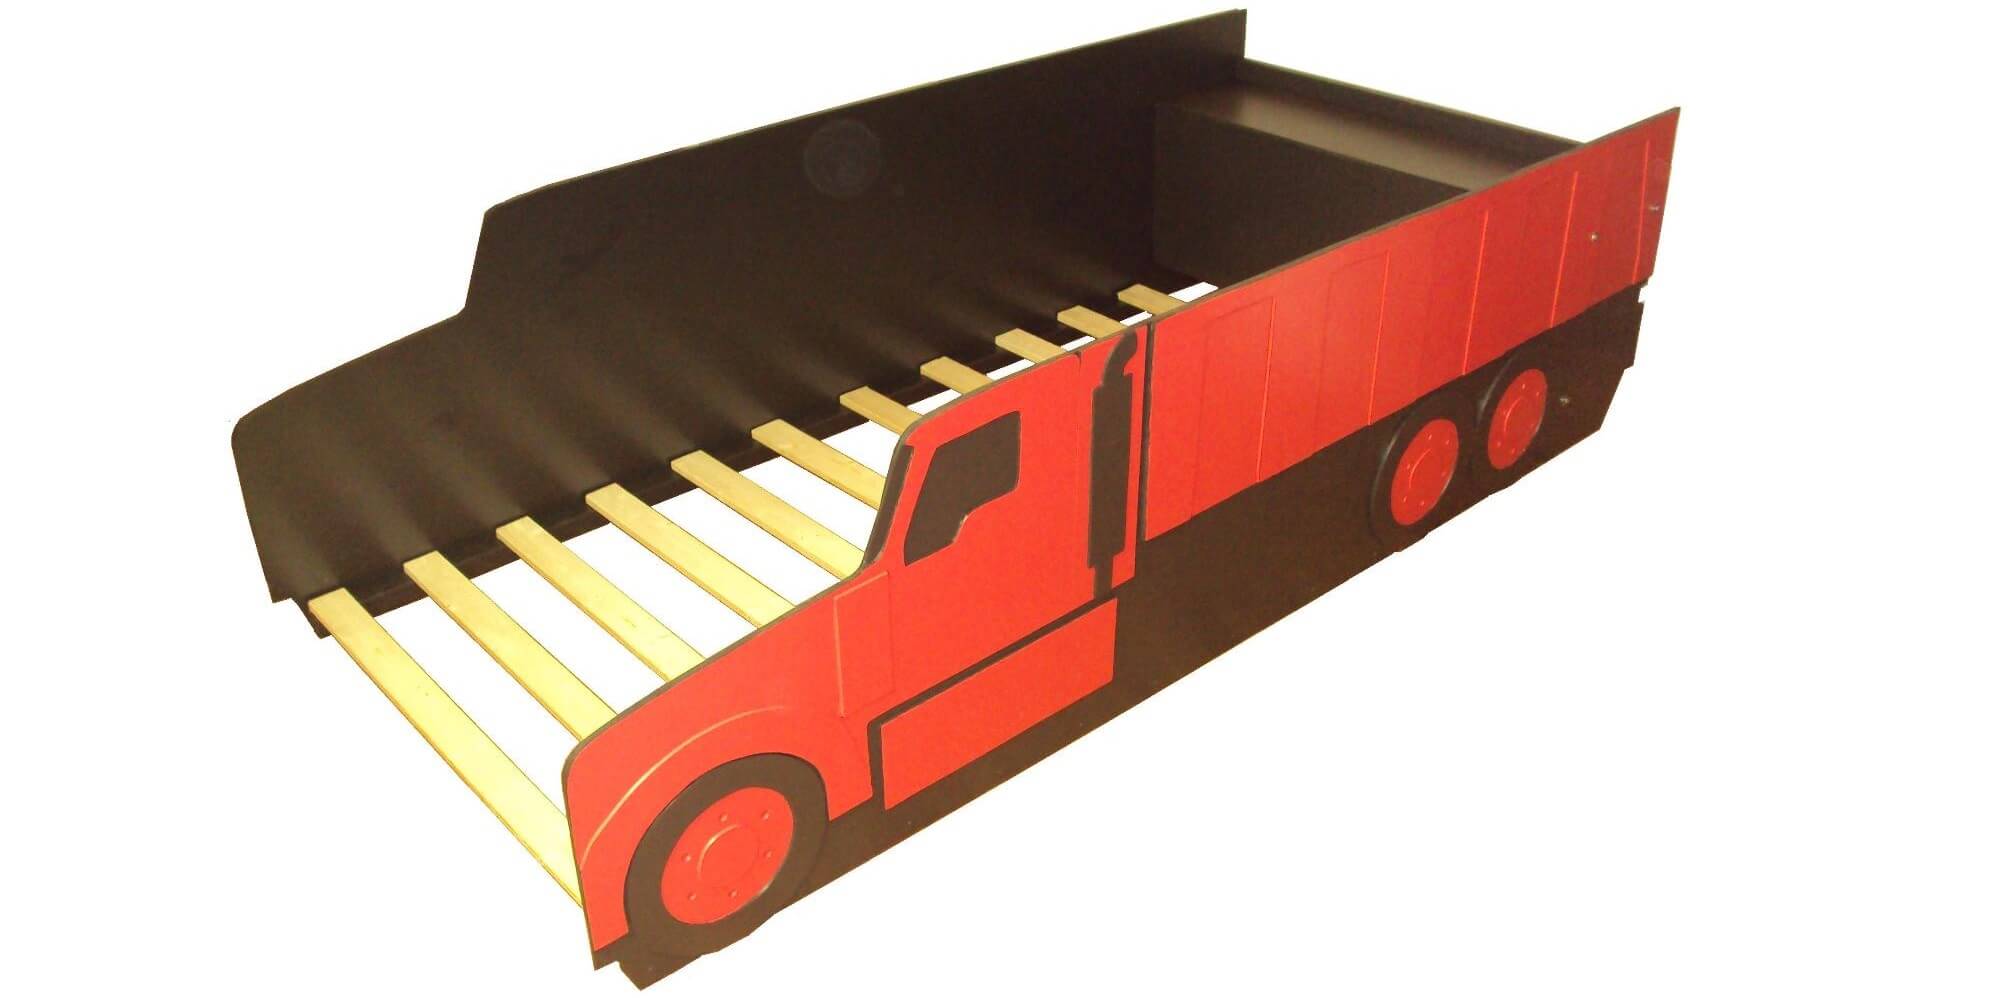 Dump truck bed in red